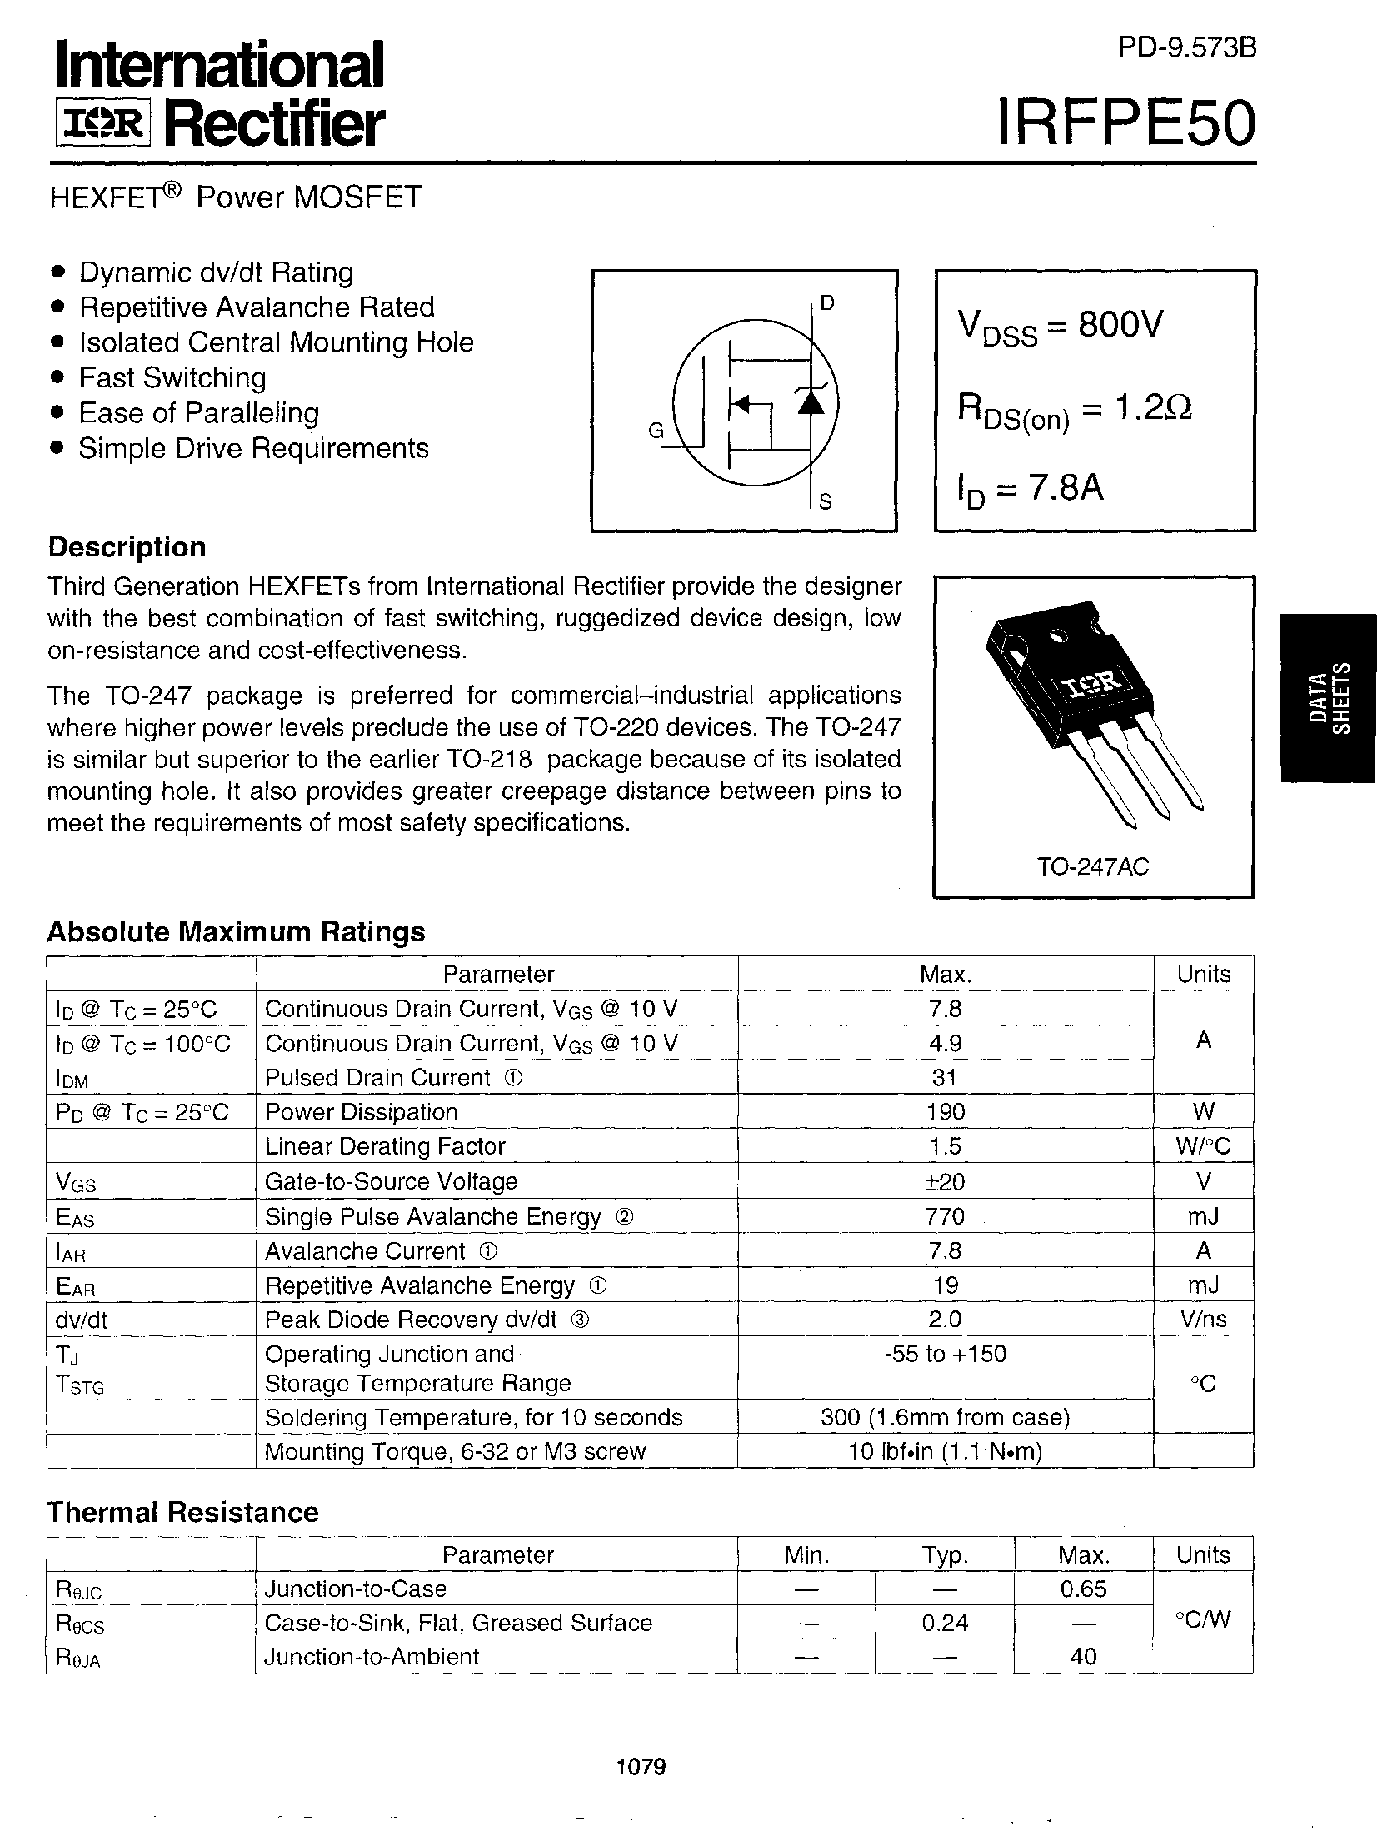 Datasheet IRFPE50 - Power MOSFET page 1